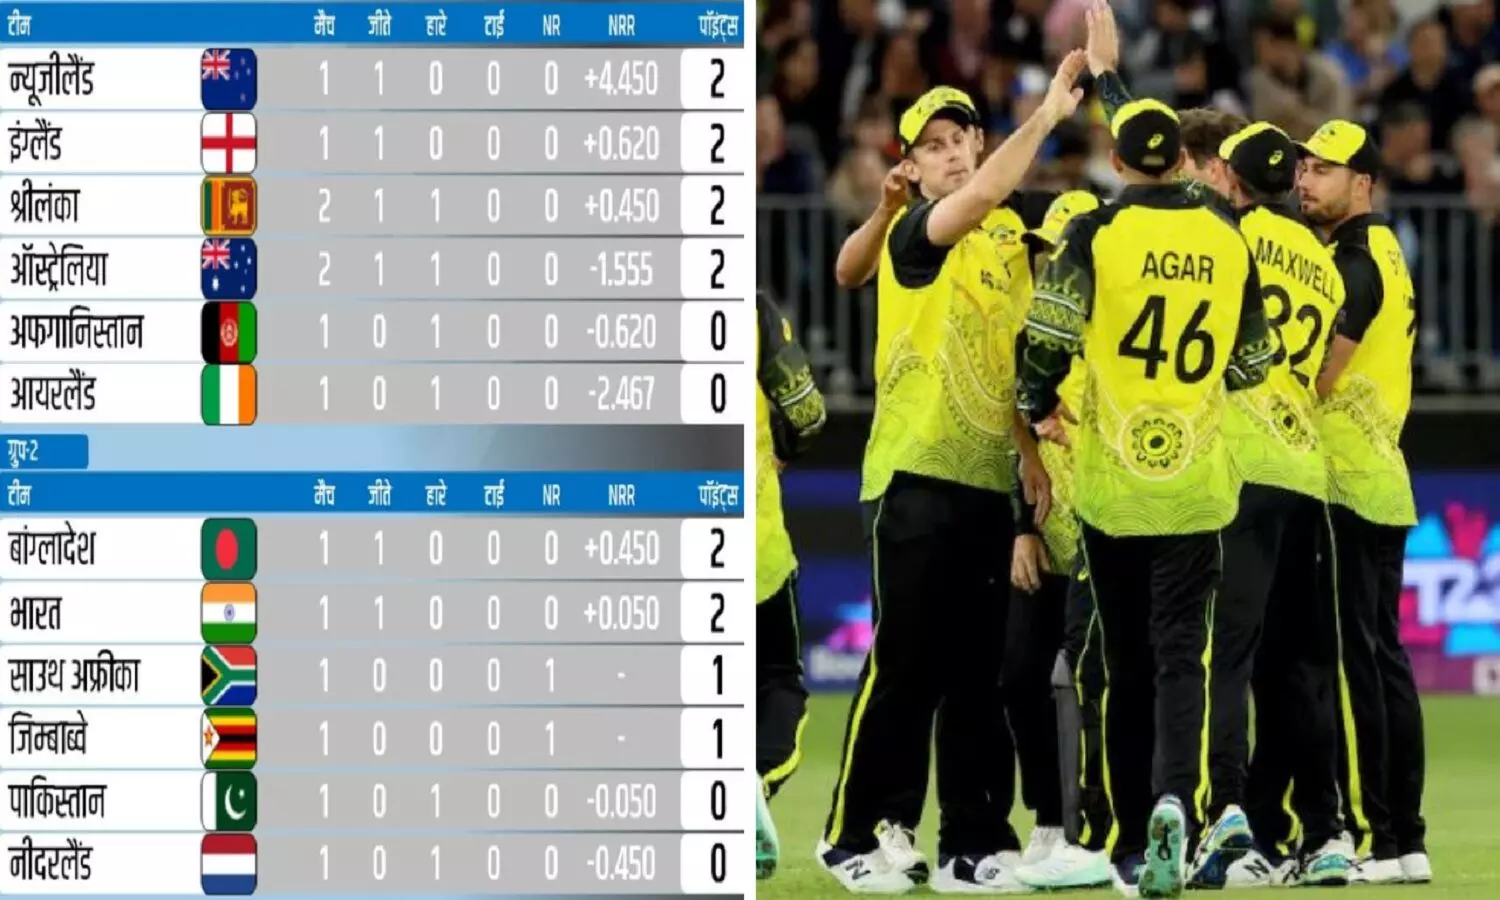 T20 World Cup 2022 Points Table